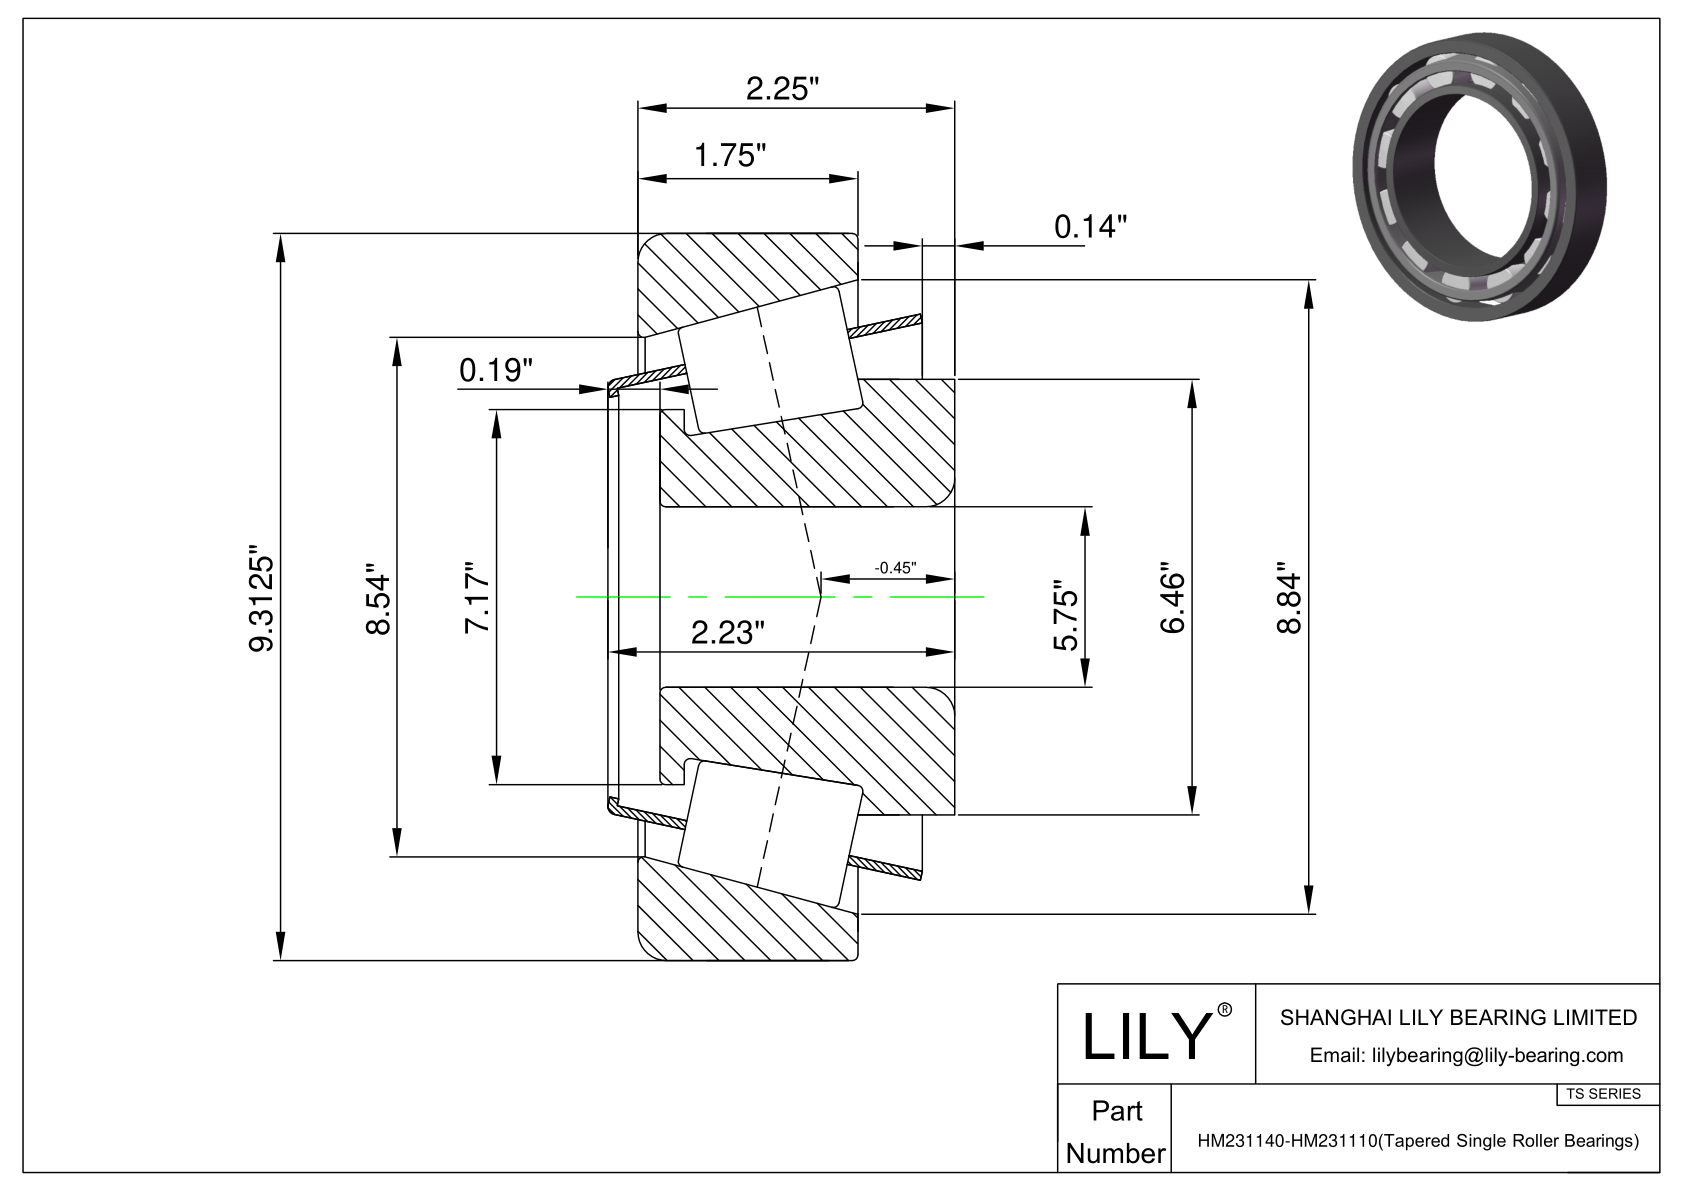 HM231140-HM231110 TS (Tapered Single Roller Bearings) (Imperial) cad drawing